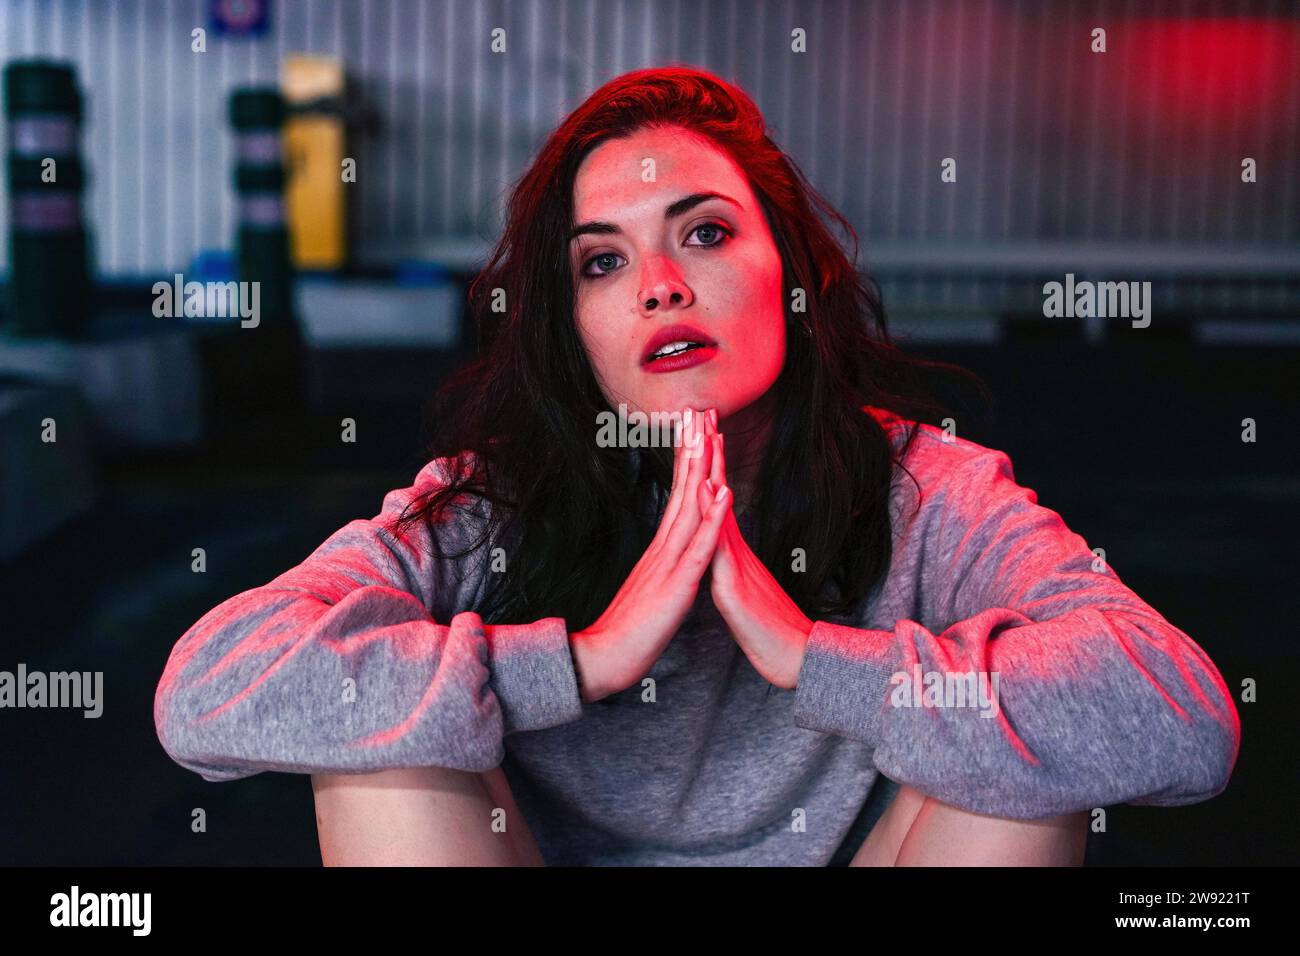 Woman sitting with hands clasped under red lighting Stock Photo